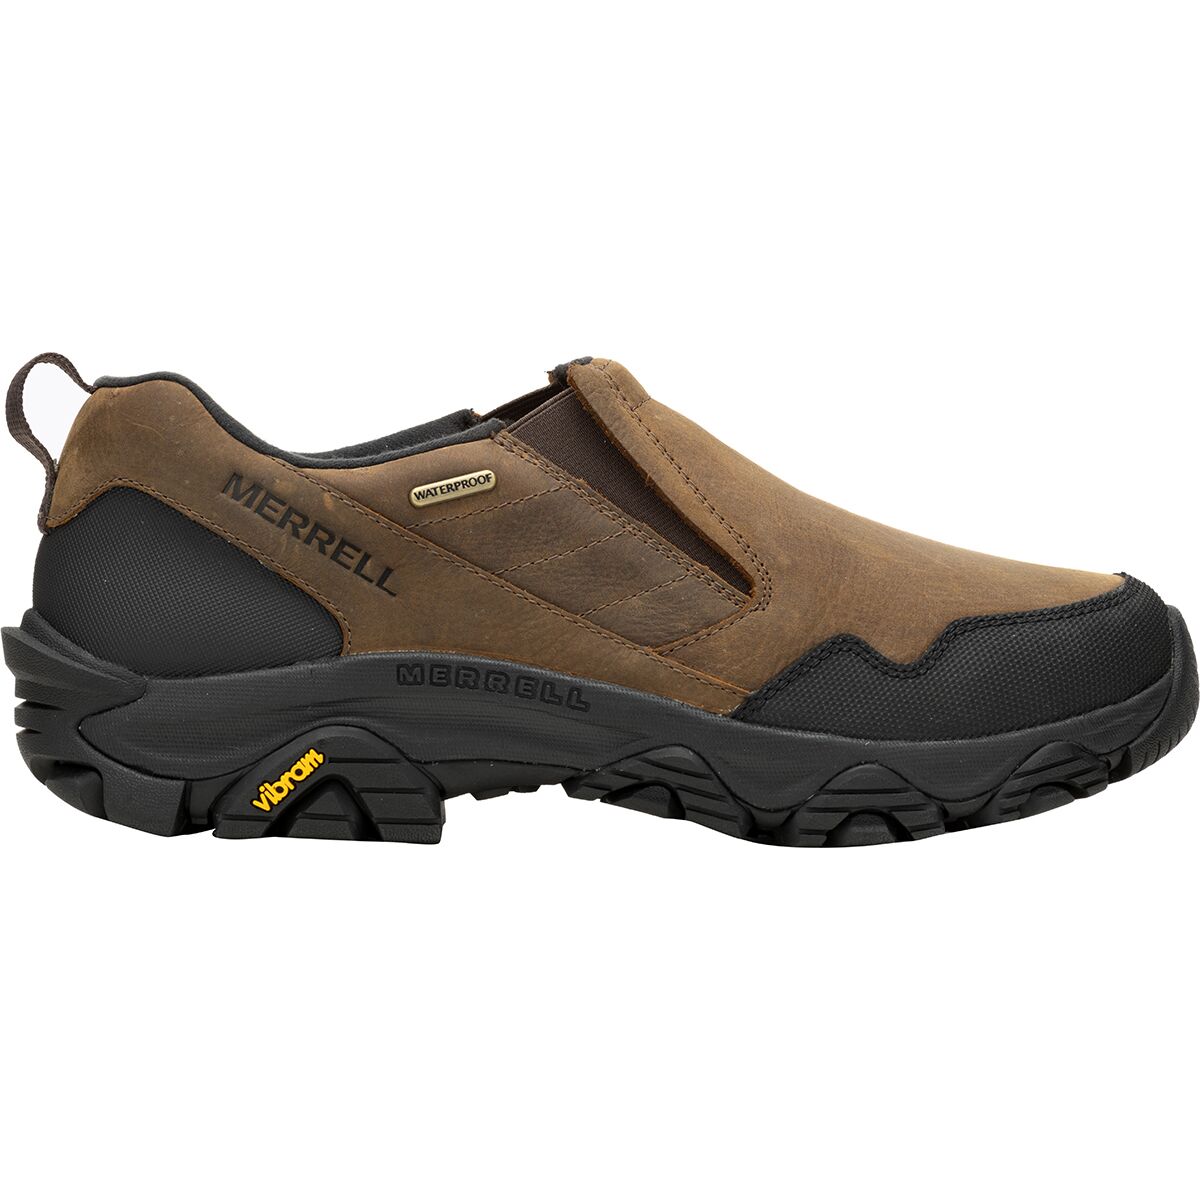 Coldpack 3 Thermo Moc WP Shoe - Men